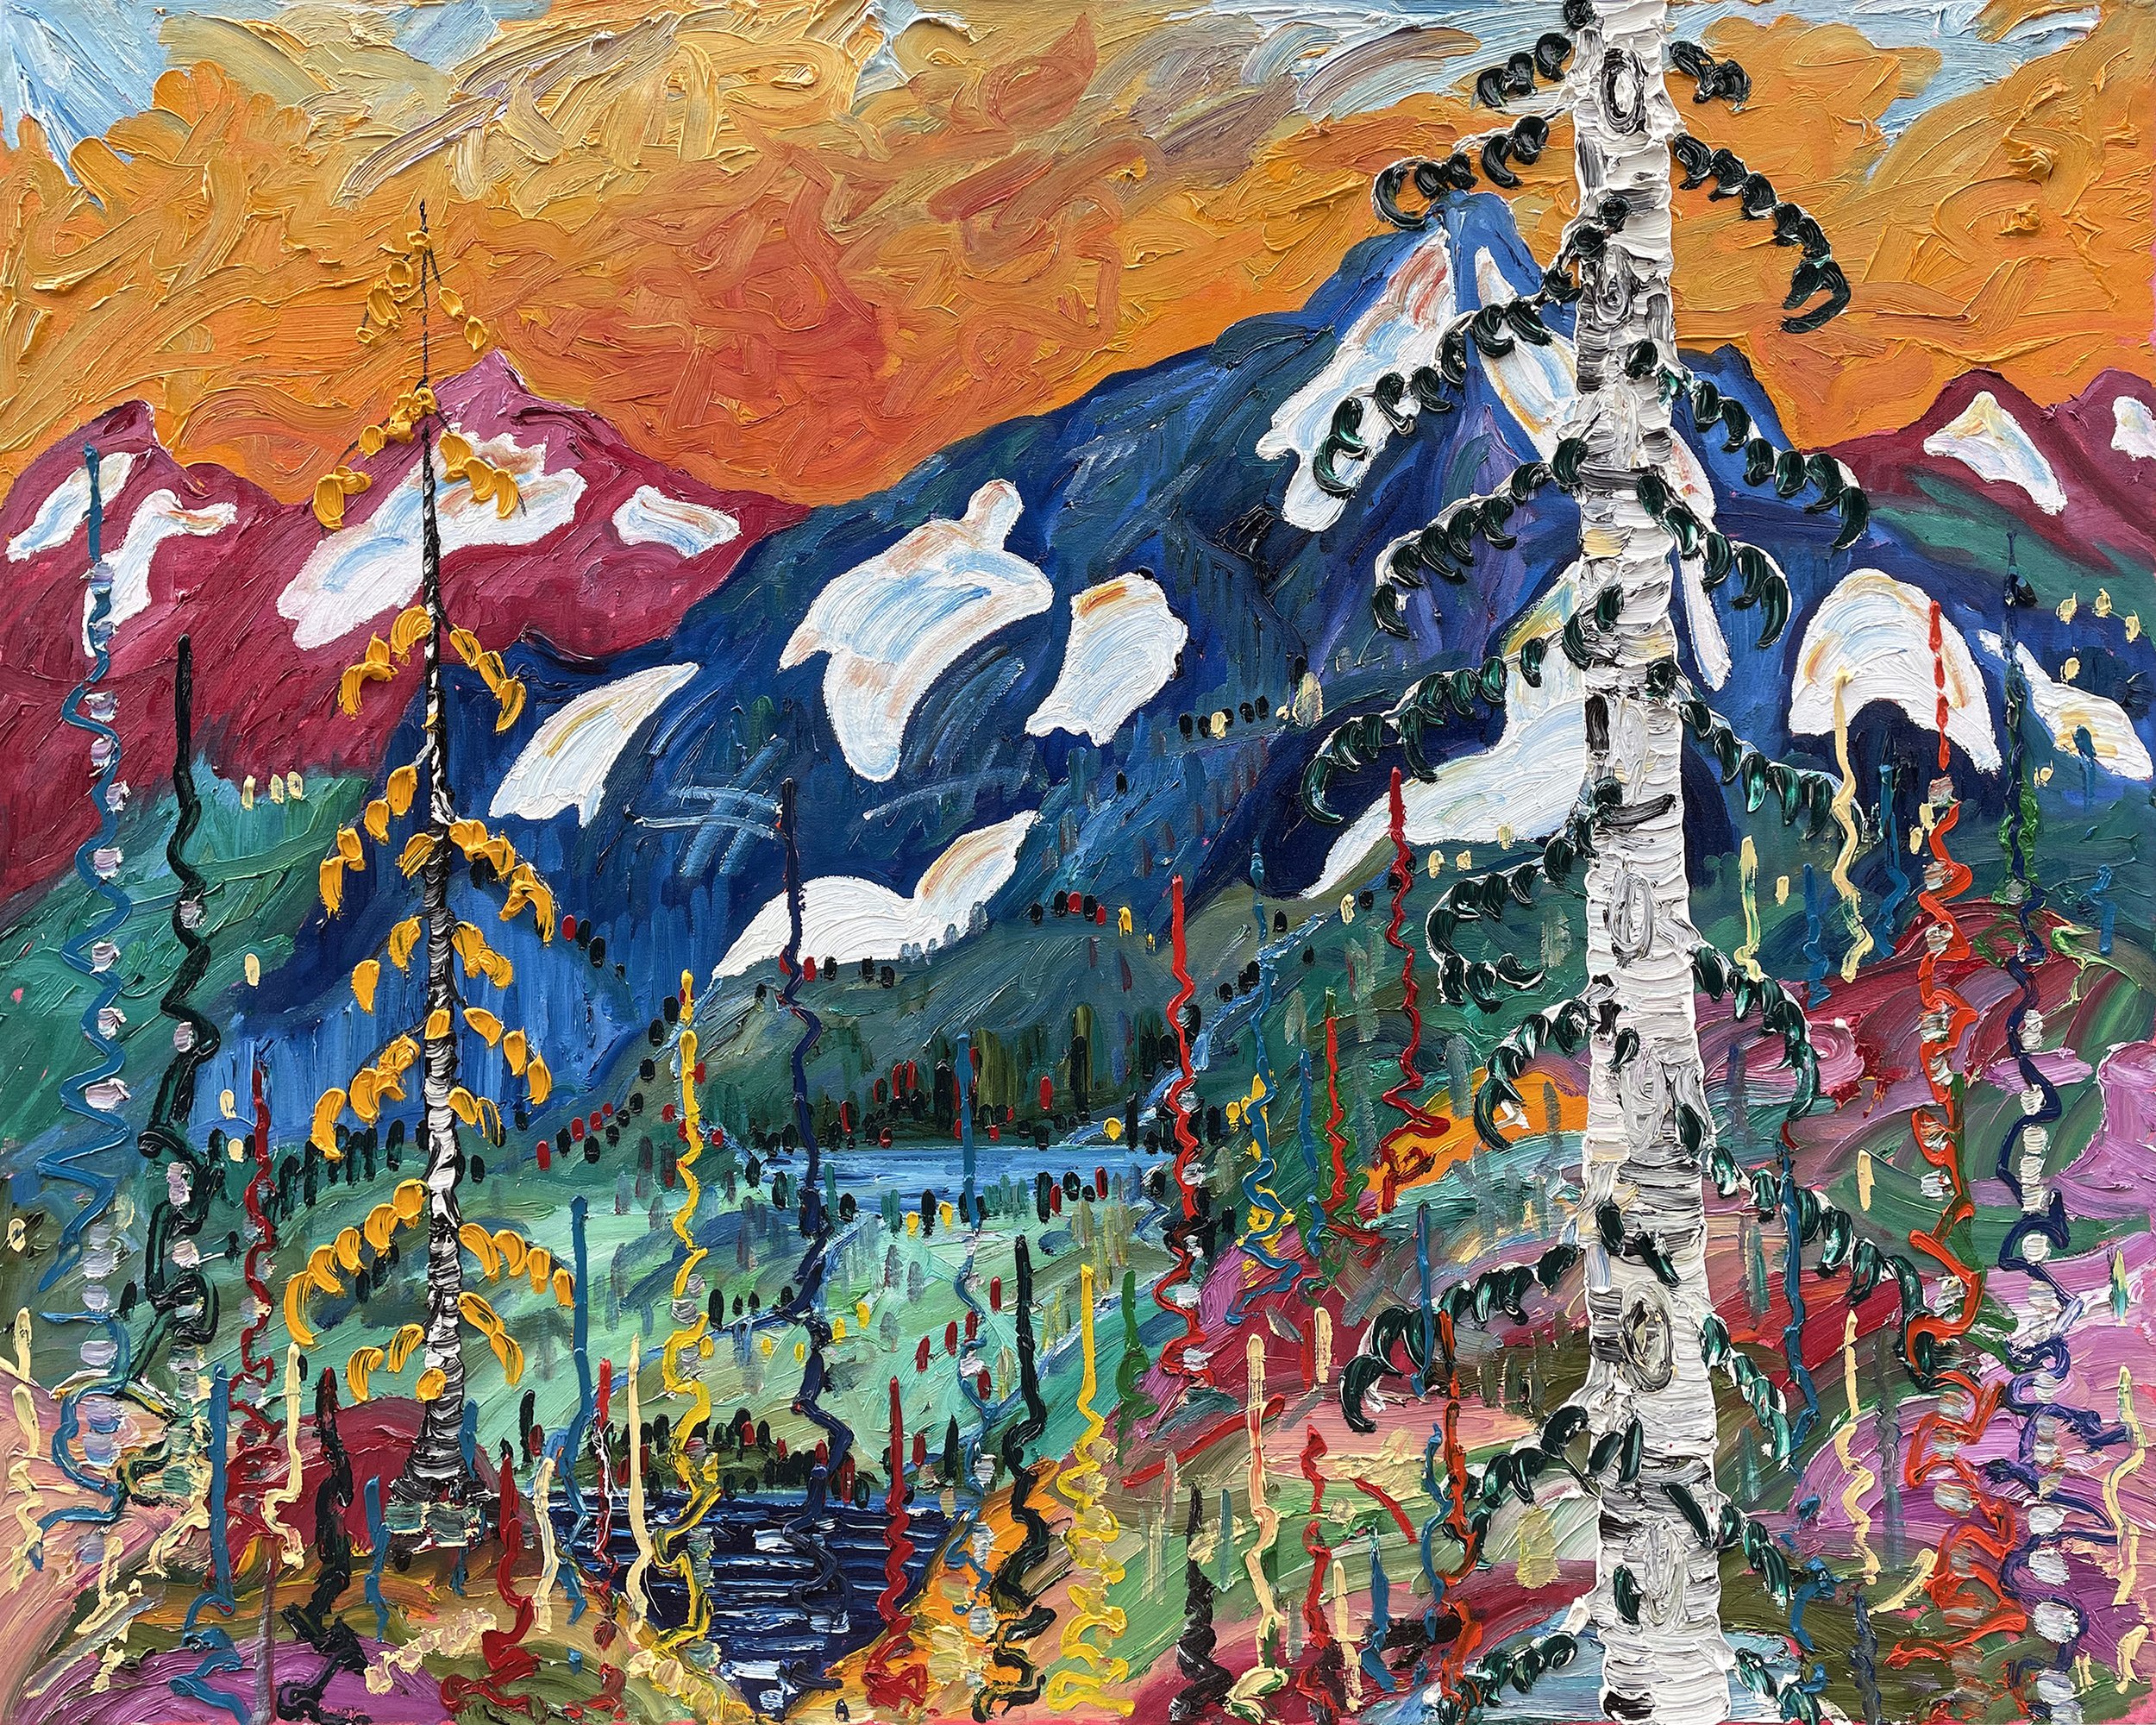 Two Lakes the Rockies, 2006, 40.25 x 50.25 in, oil on canvas (On hold)